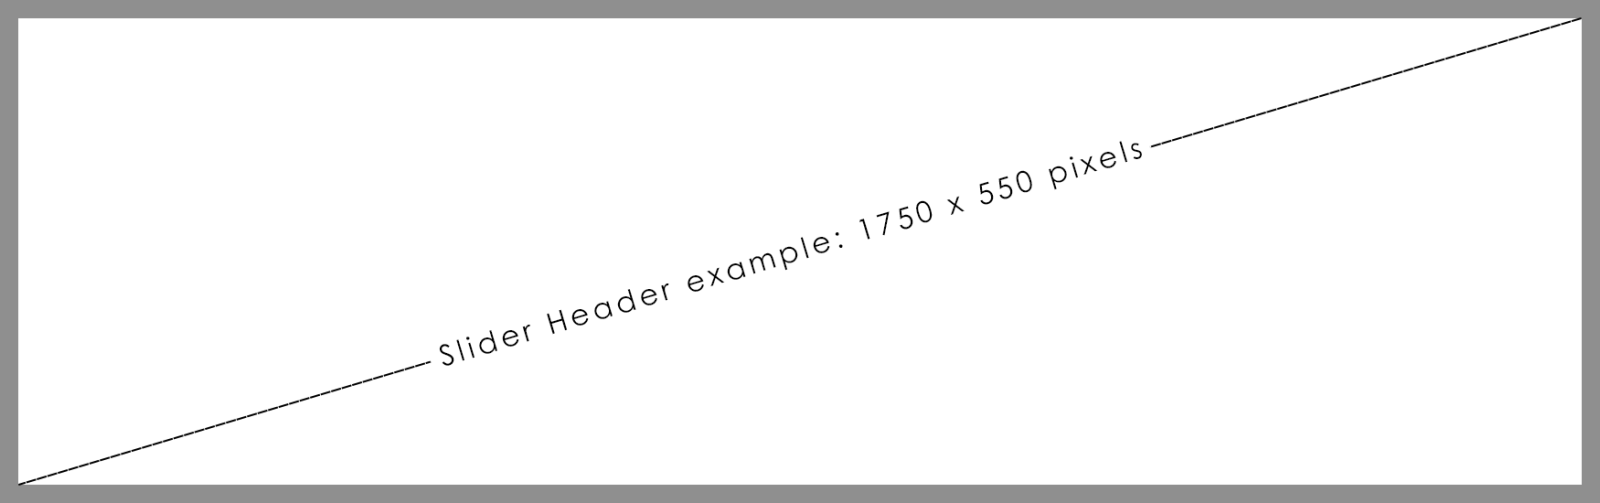 Example image showing the size of the slider header advert with sizing: 1750 x 550 pixels